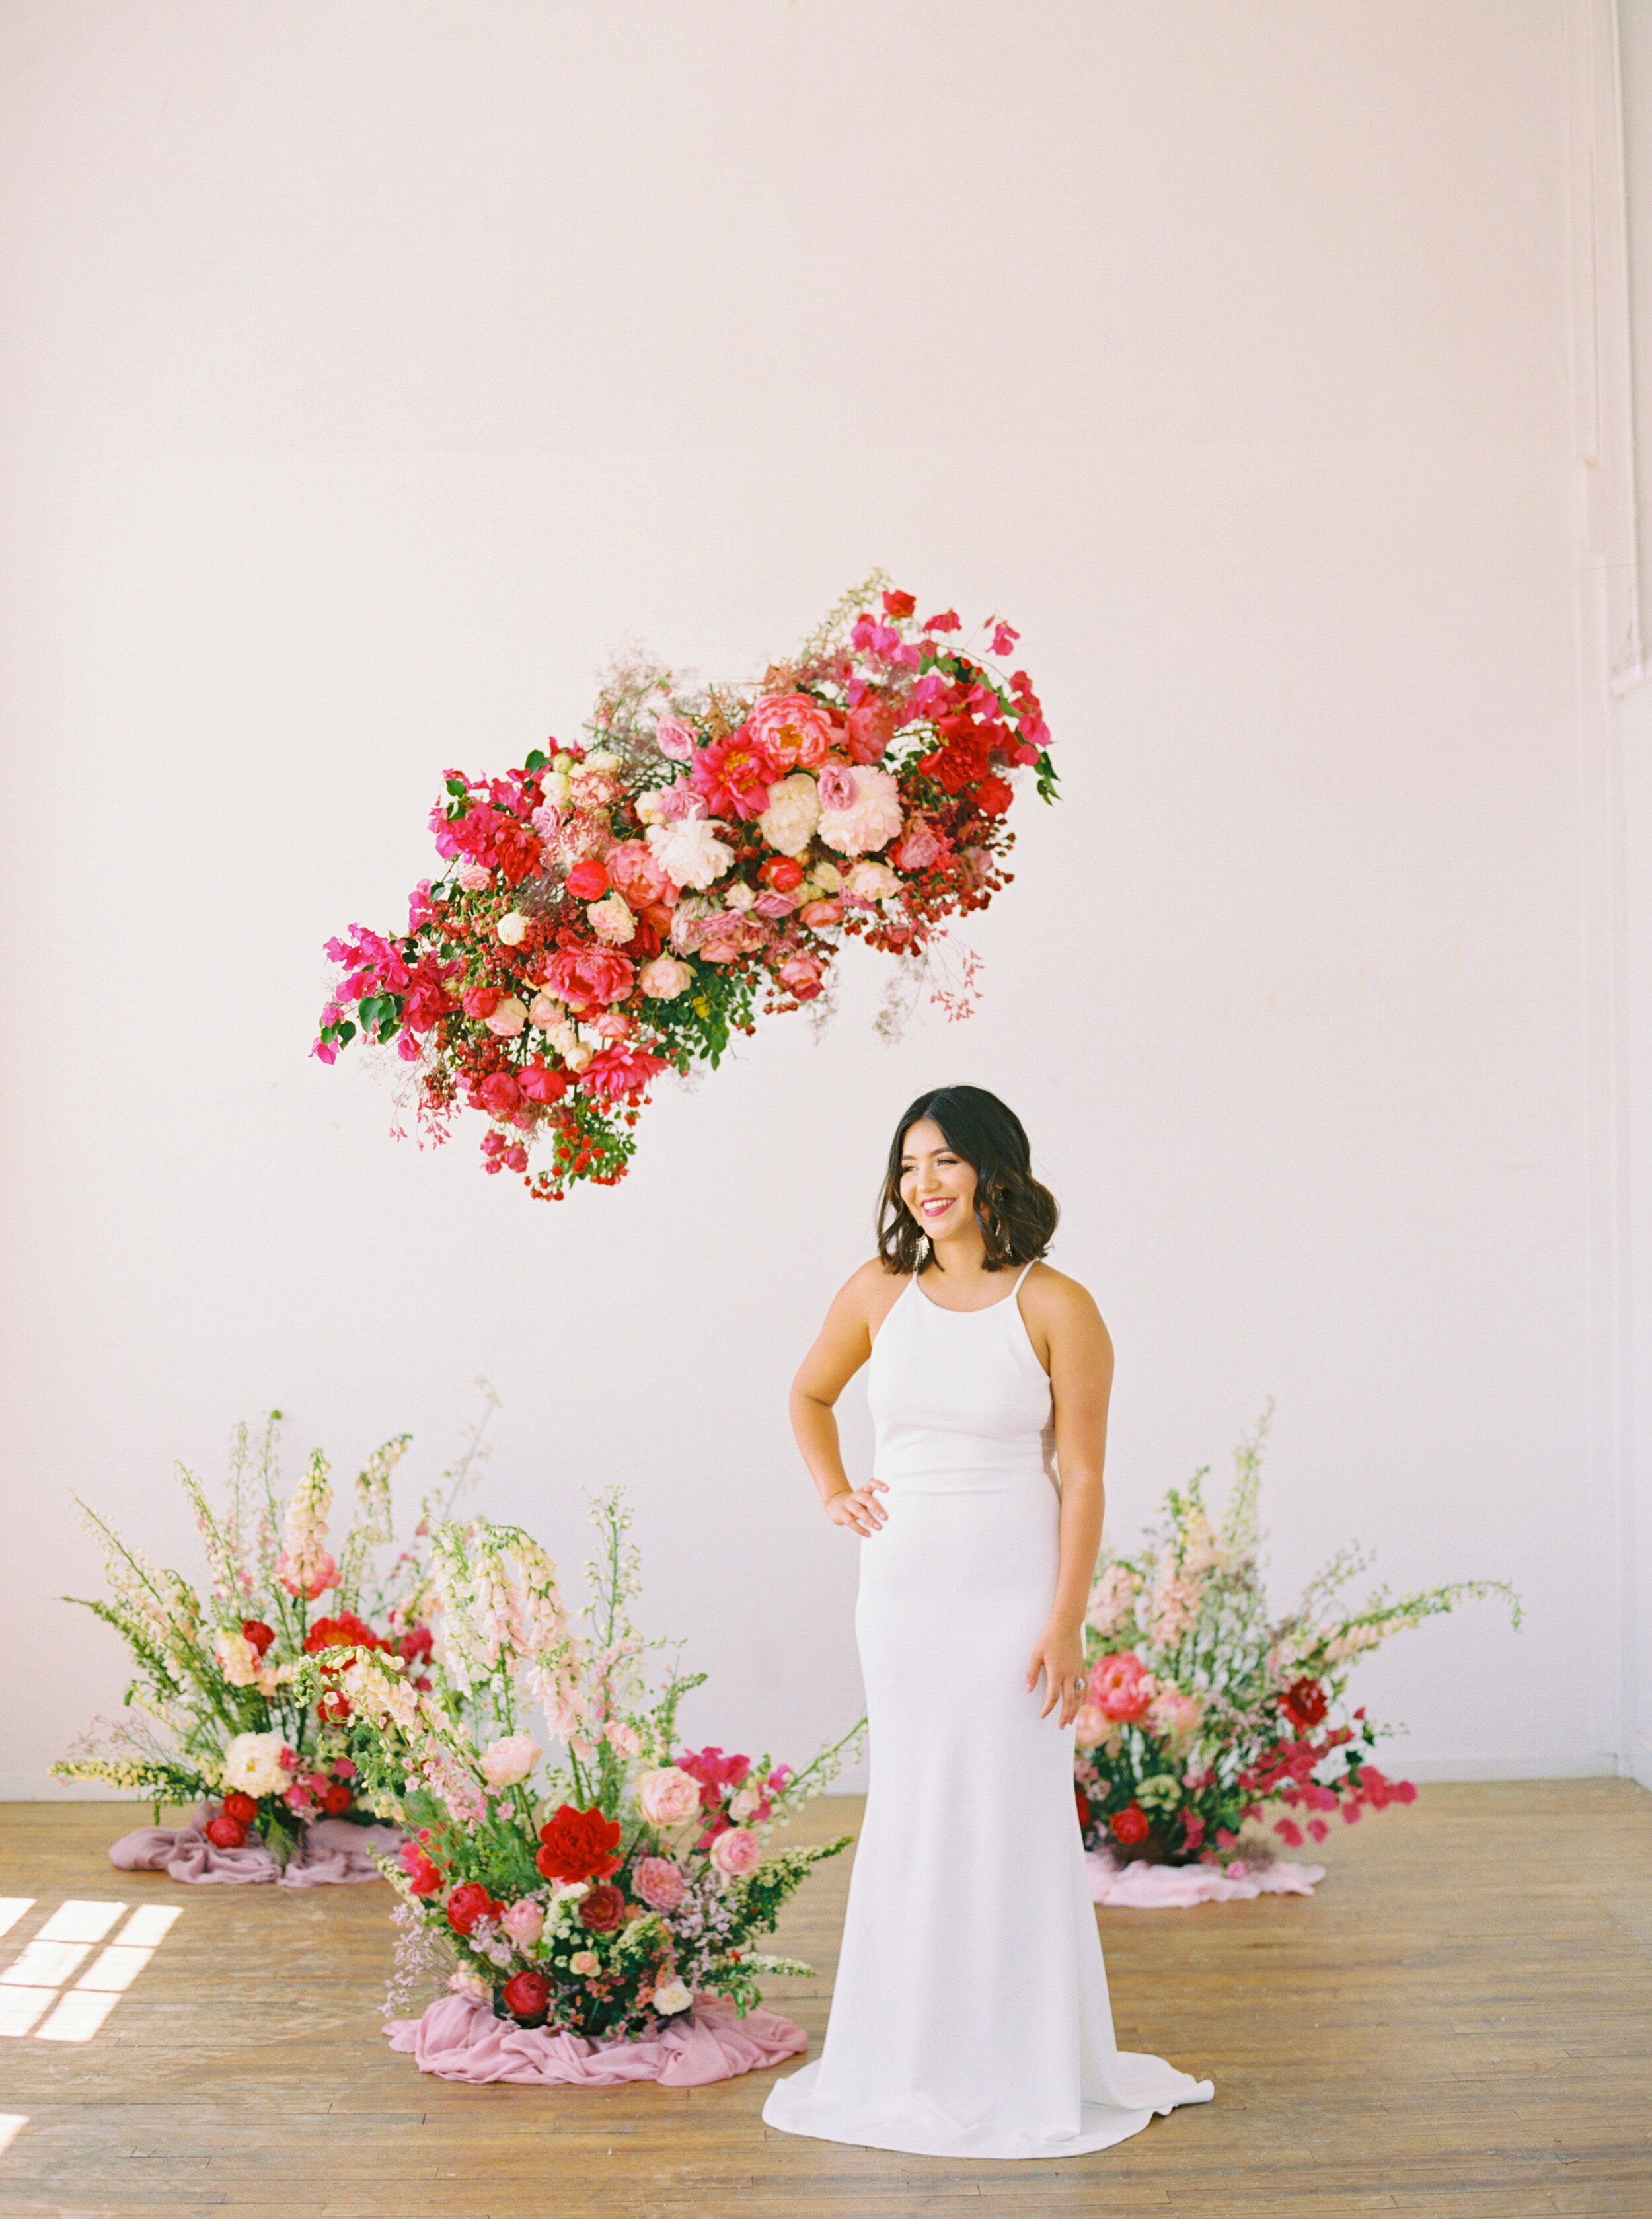 A Romantic Wedding Elopement Filled with Colorful Fuchsia - Sarahi Hadden Submission-42.jpg